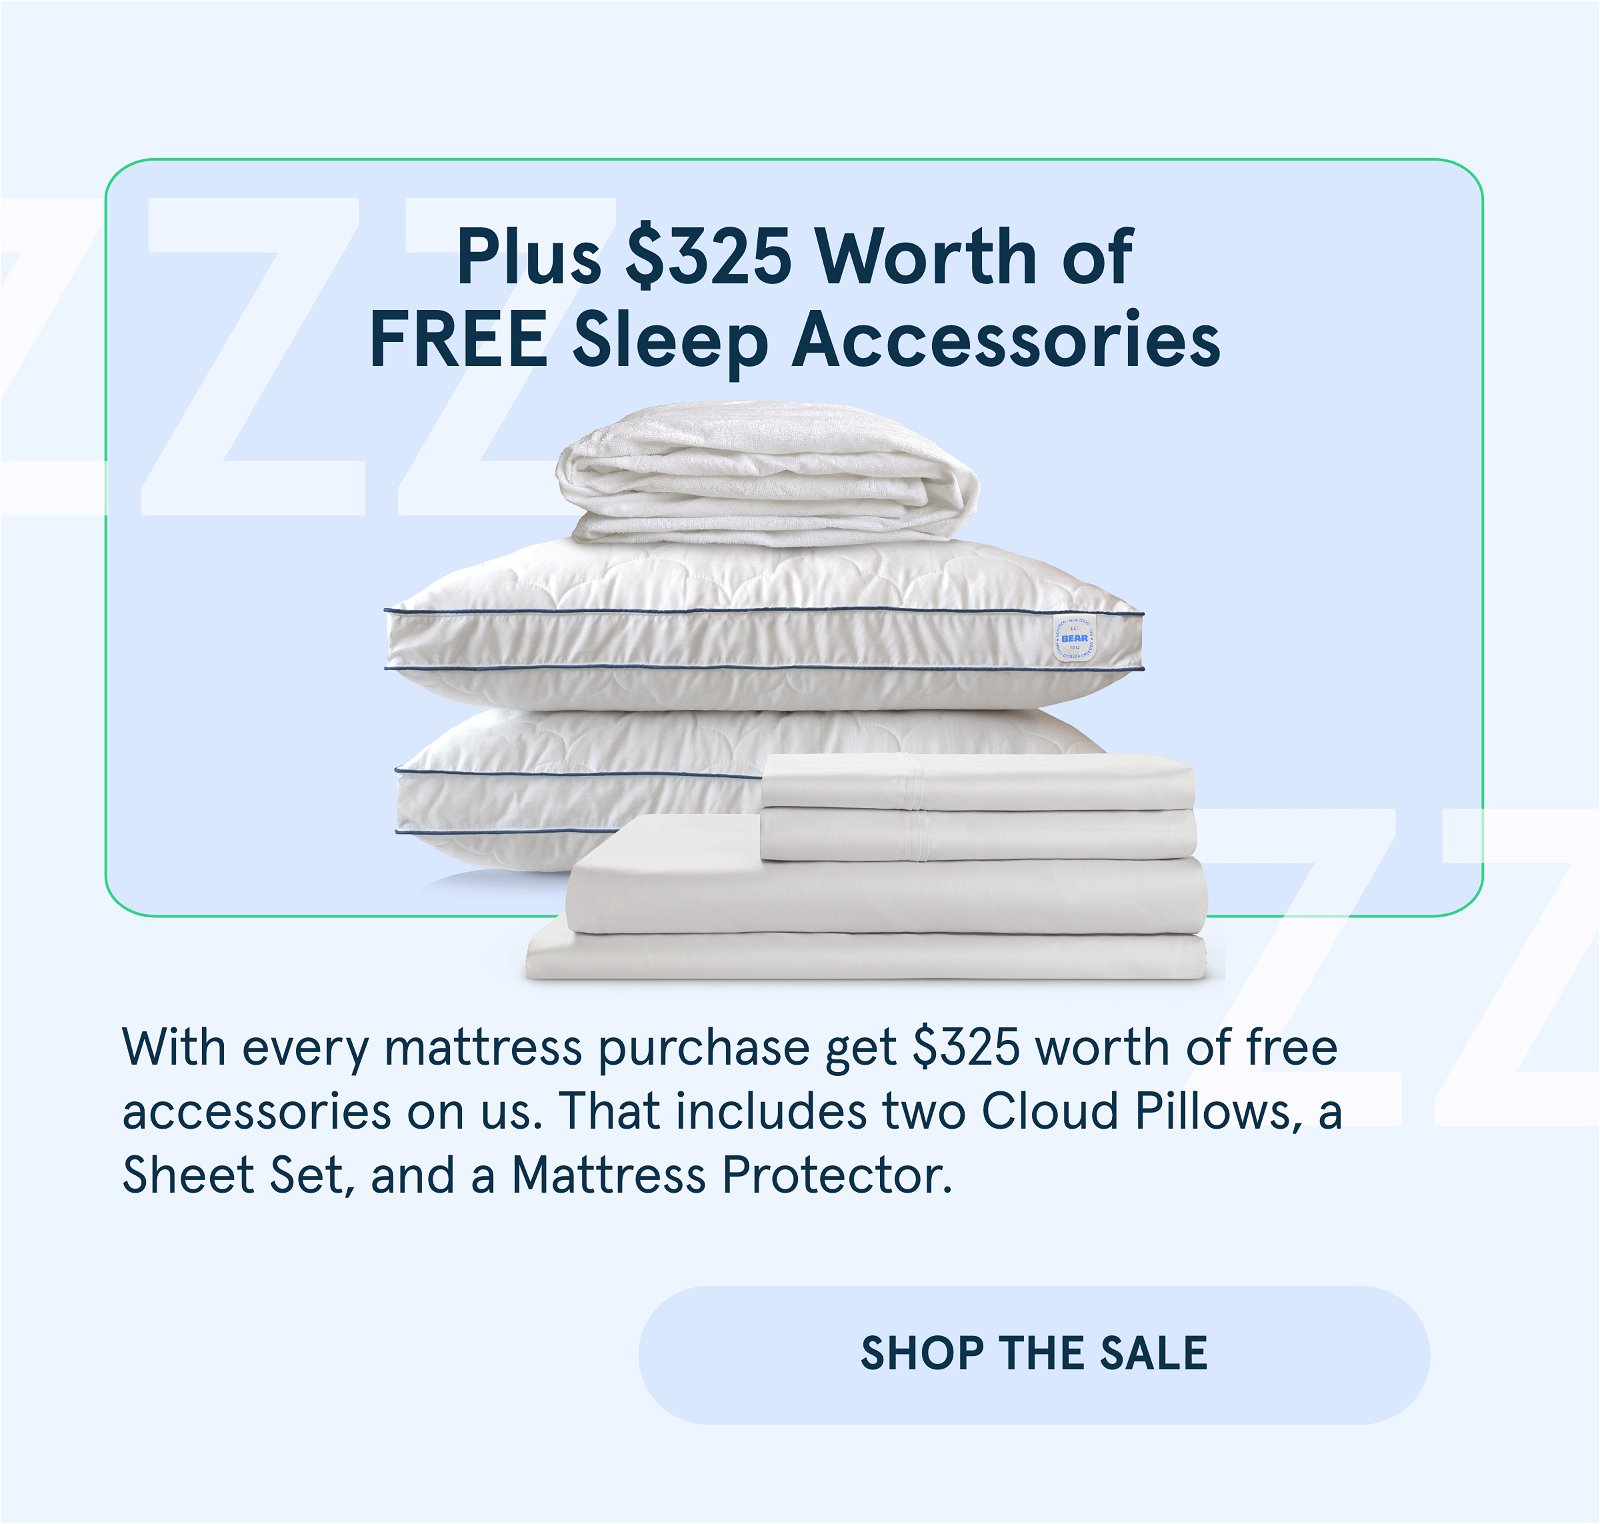 plus free sleep accessories with mattress purchase